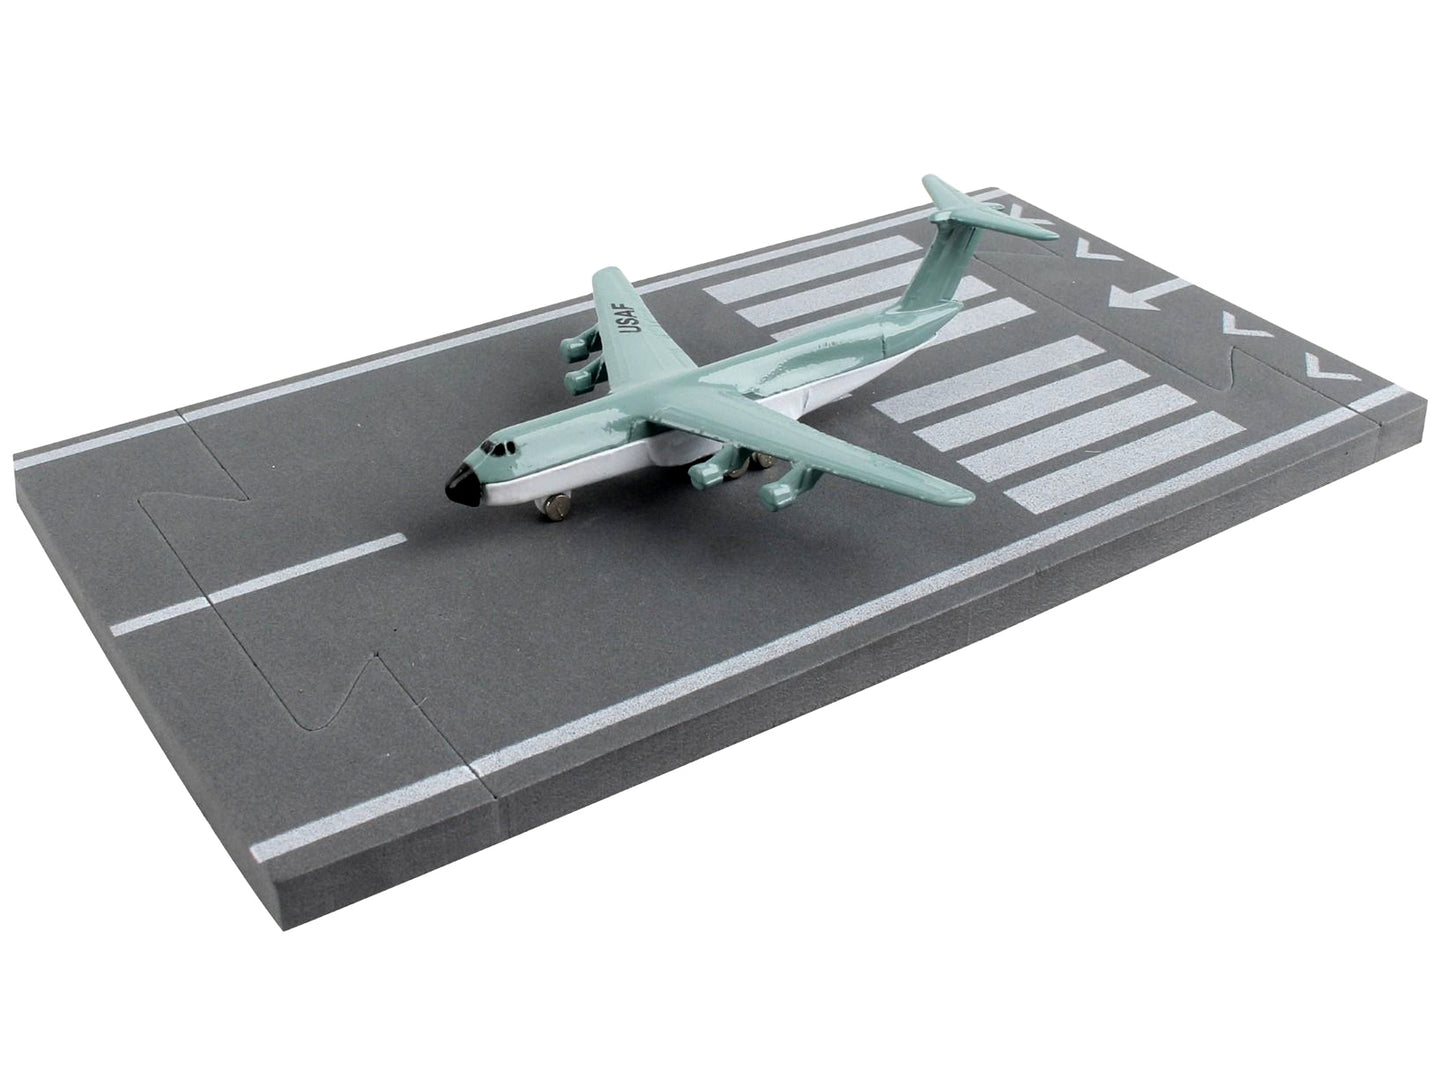 Lockheed C-5 Galaxy Transport Aircraft Gray and White "United States Air Force" with Runway Section Diecast Model Airplane by Runway24